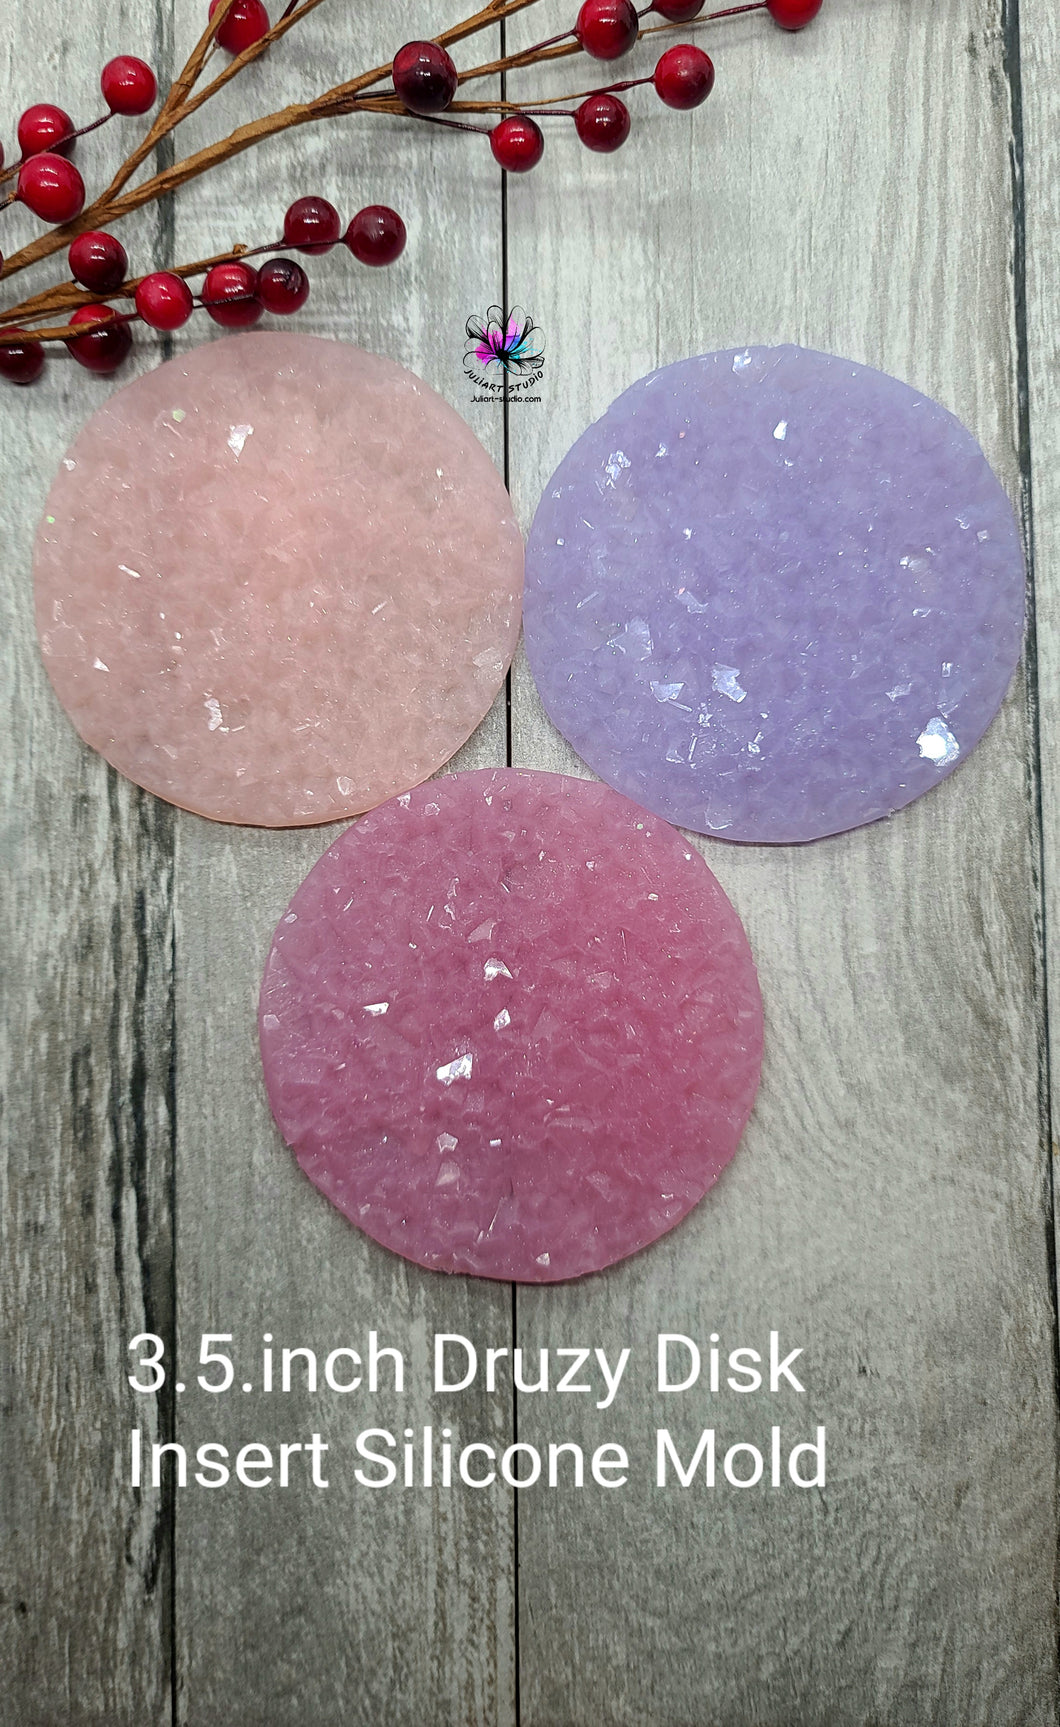 3.5 inch Druzy Disk Insert Silicone Mold for Resin